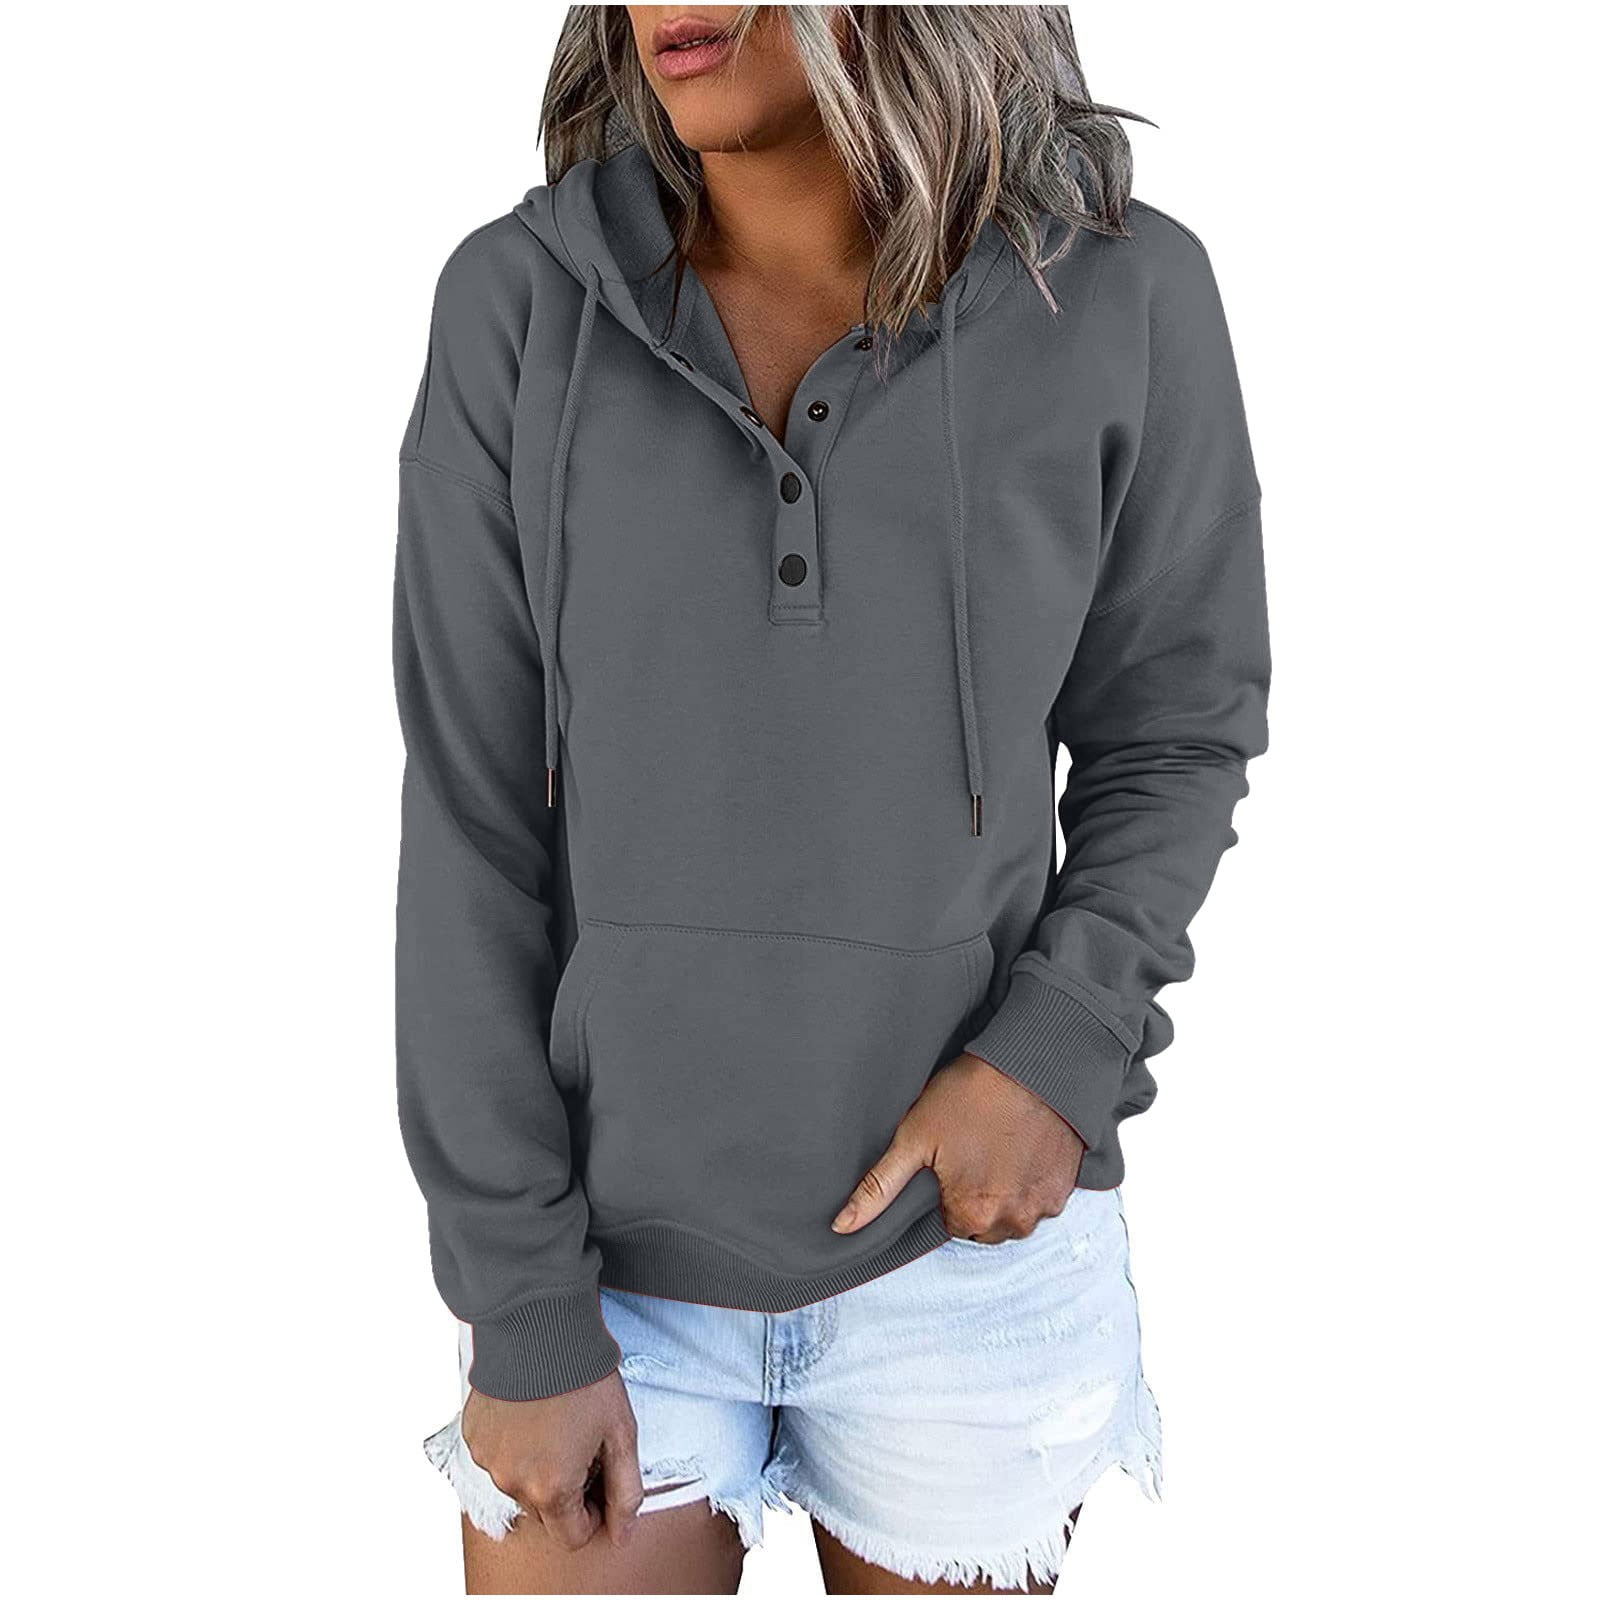 Sweatshirt for Womens Fashion Hoodies 1/4 Button Pullover Hooded Top ...